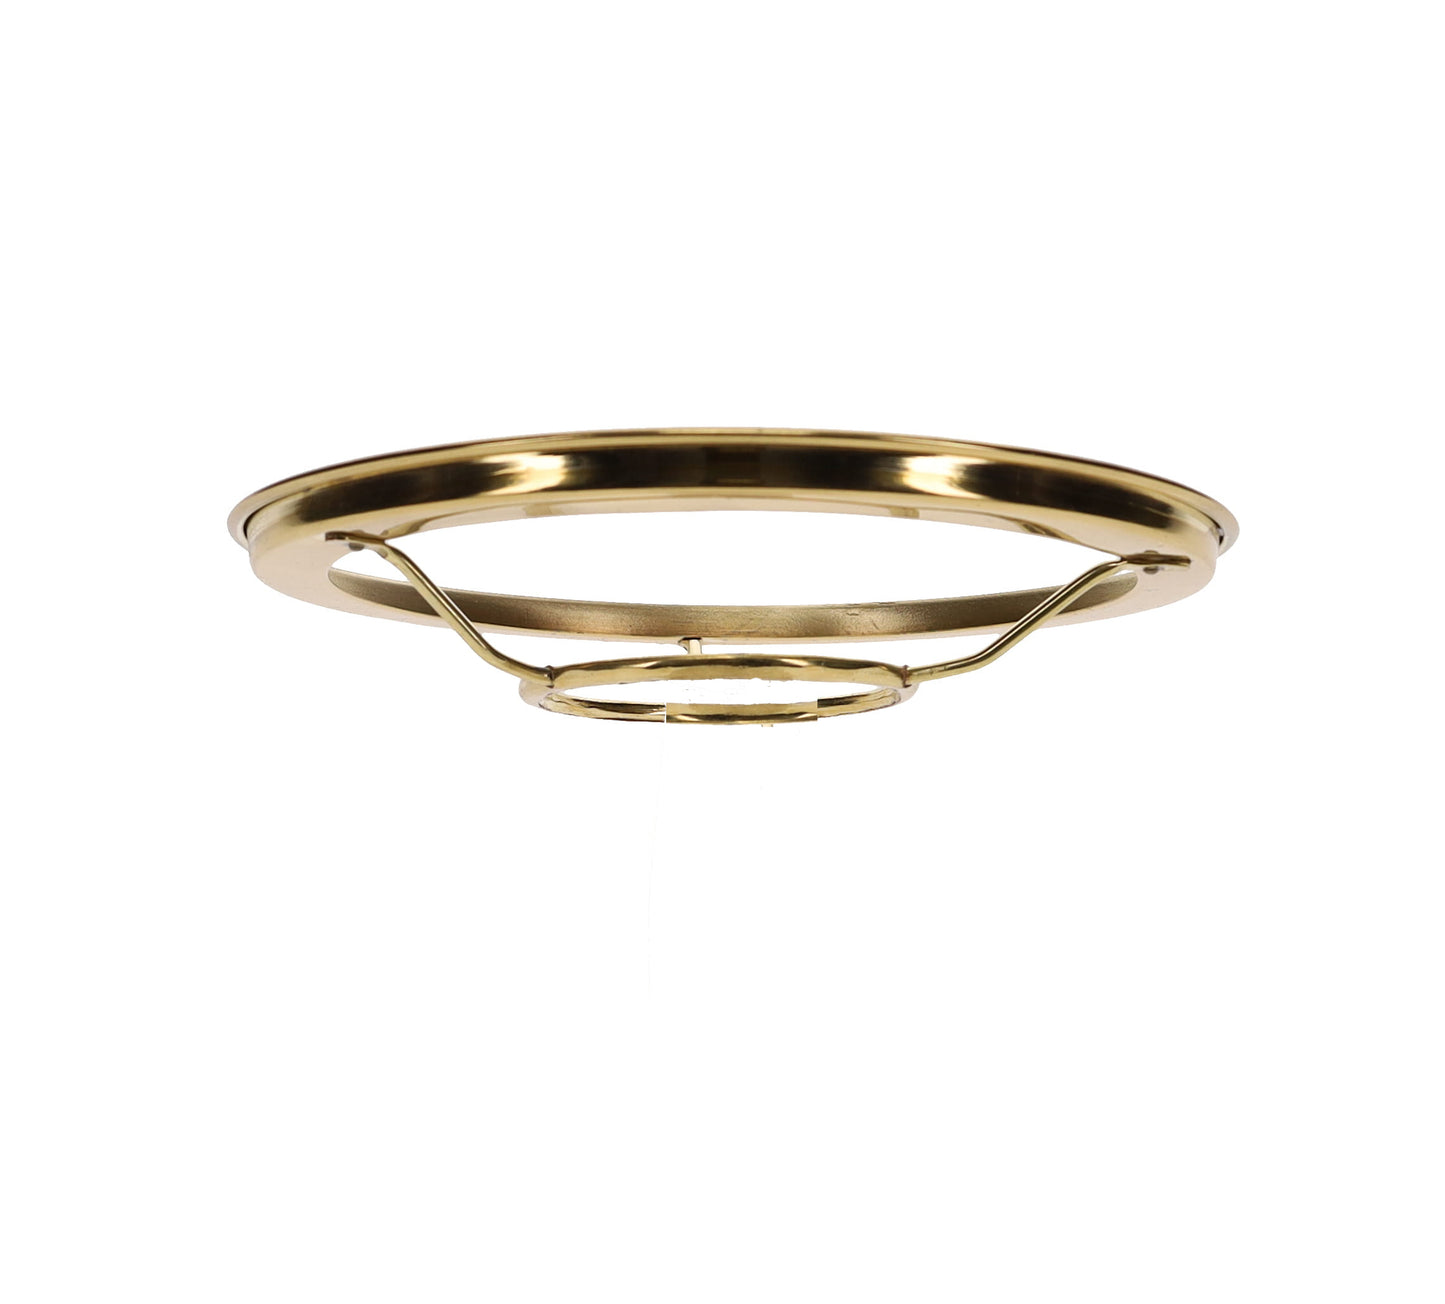 Solid Brass Shade Ring Type Holders - Choice of 7 Sizes (10722)